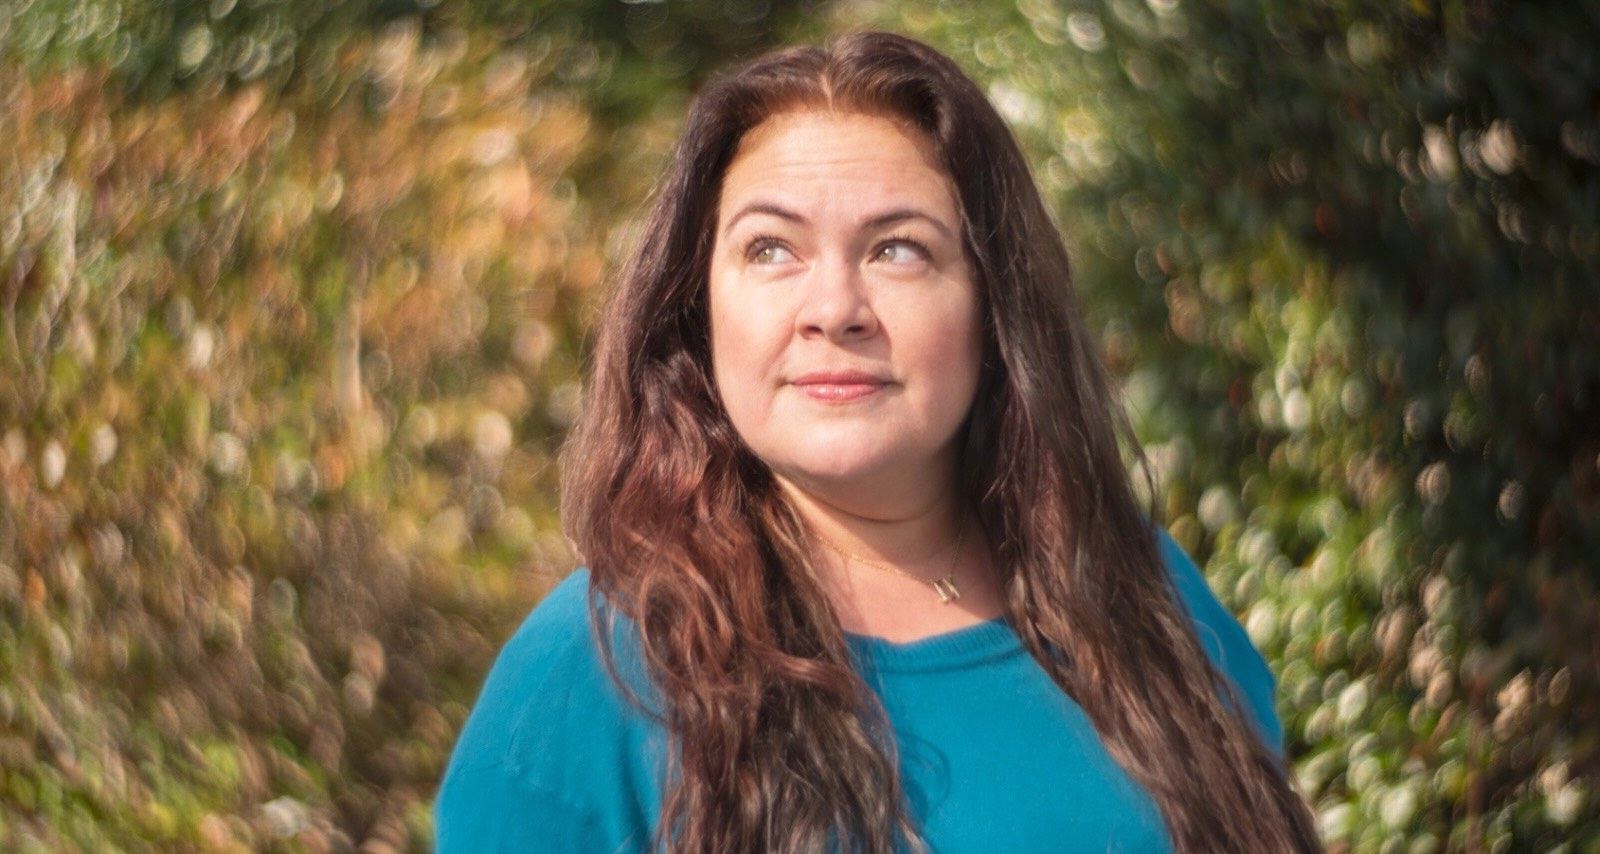 Headshot depicts Miroslava Gonzalez, a storyteller, community advocate, Producer, Writer and Director. She has long brown hair, green eyes and is wearing a teal-colored sweater.